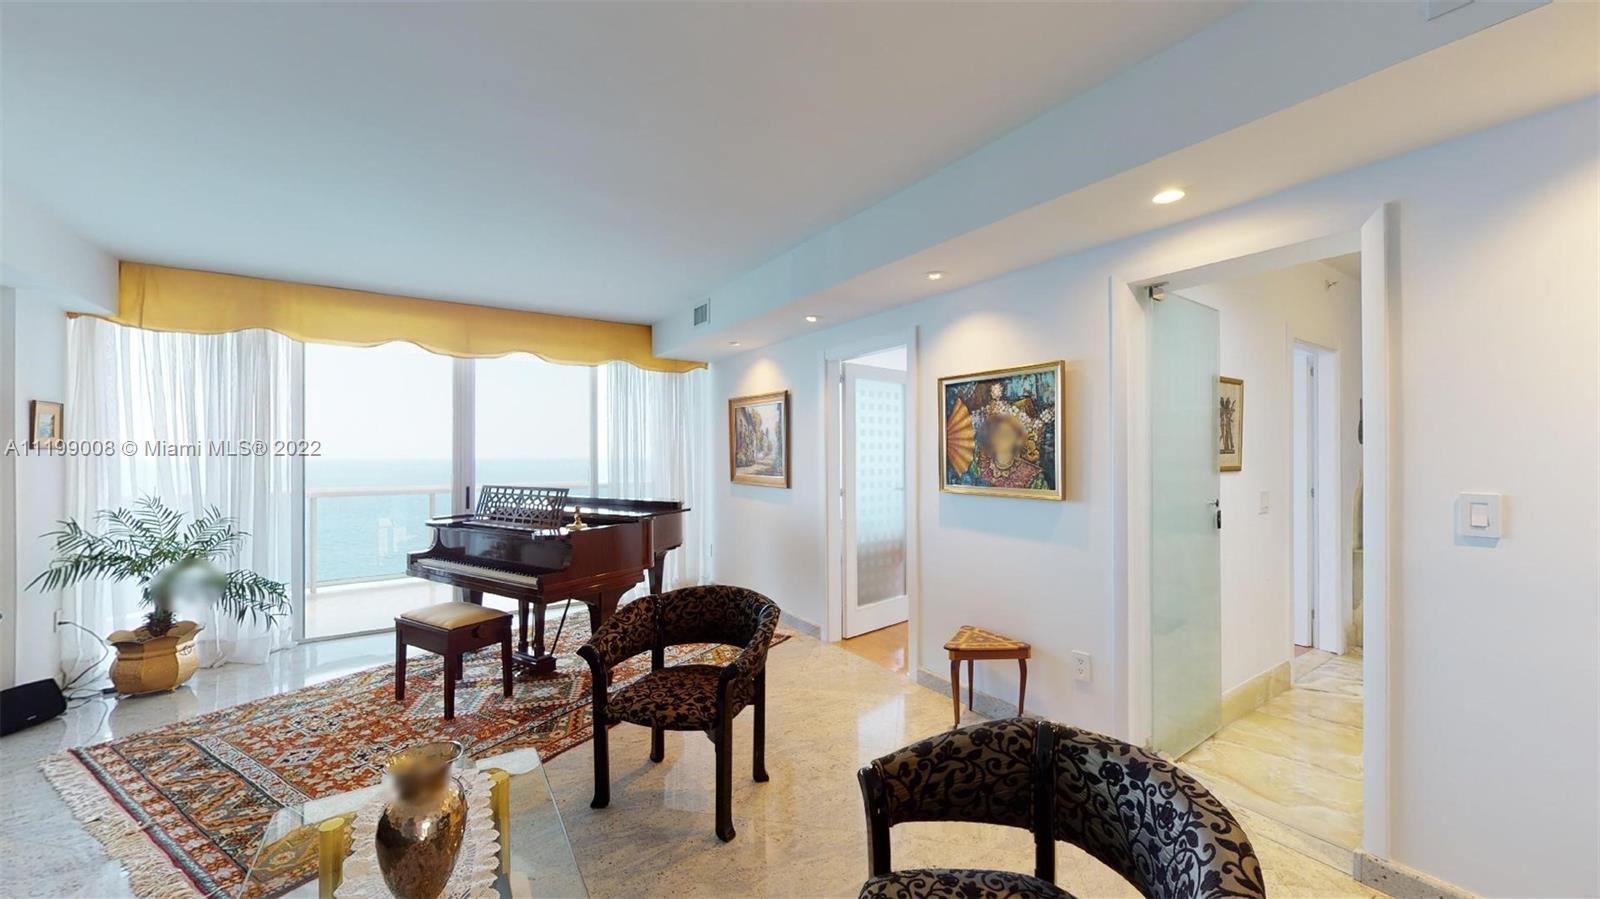 THE PINNACLE AT SUNNY ISLES BEACH A SHIMMERING LANDMARK OF ELEGANCE RISING ABOVE THE WHITE SANDS OF 